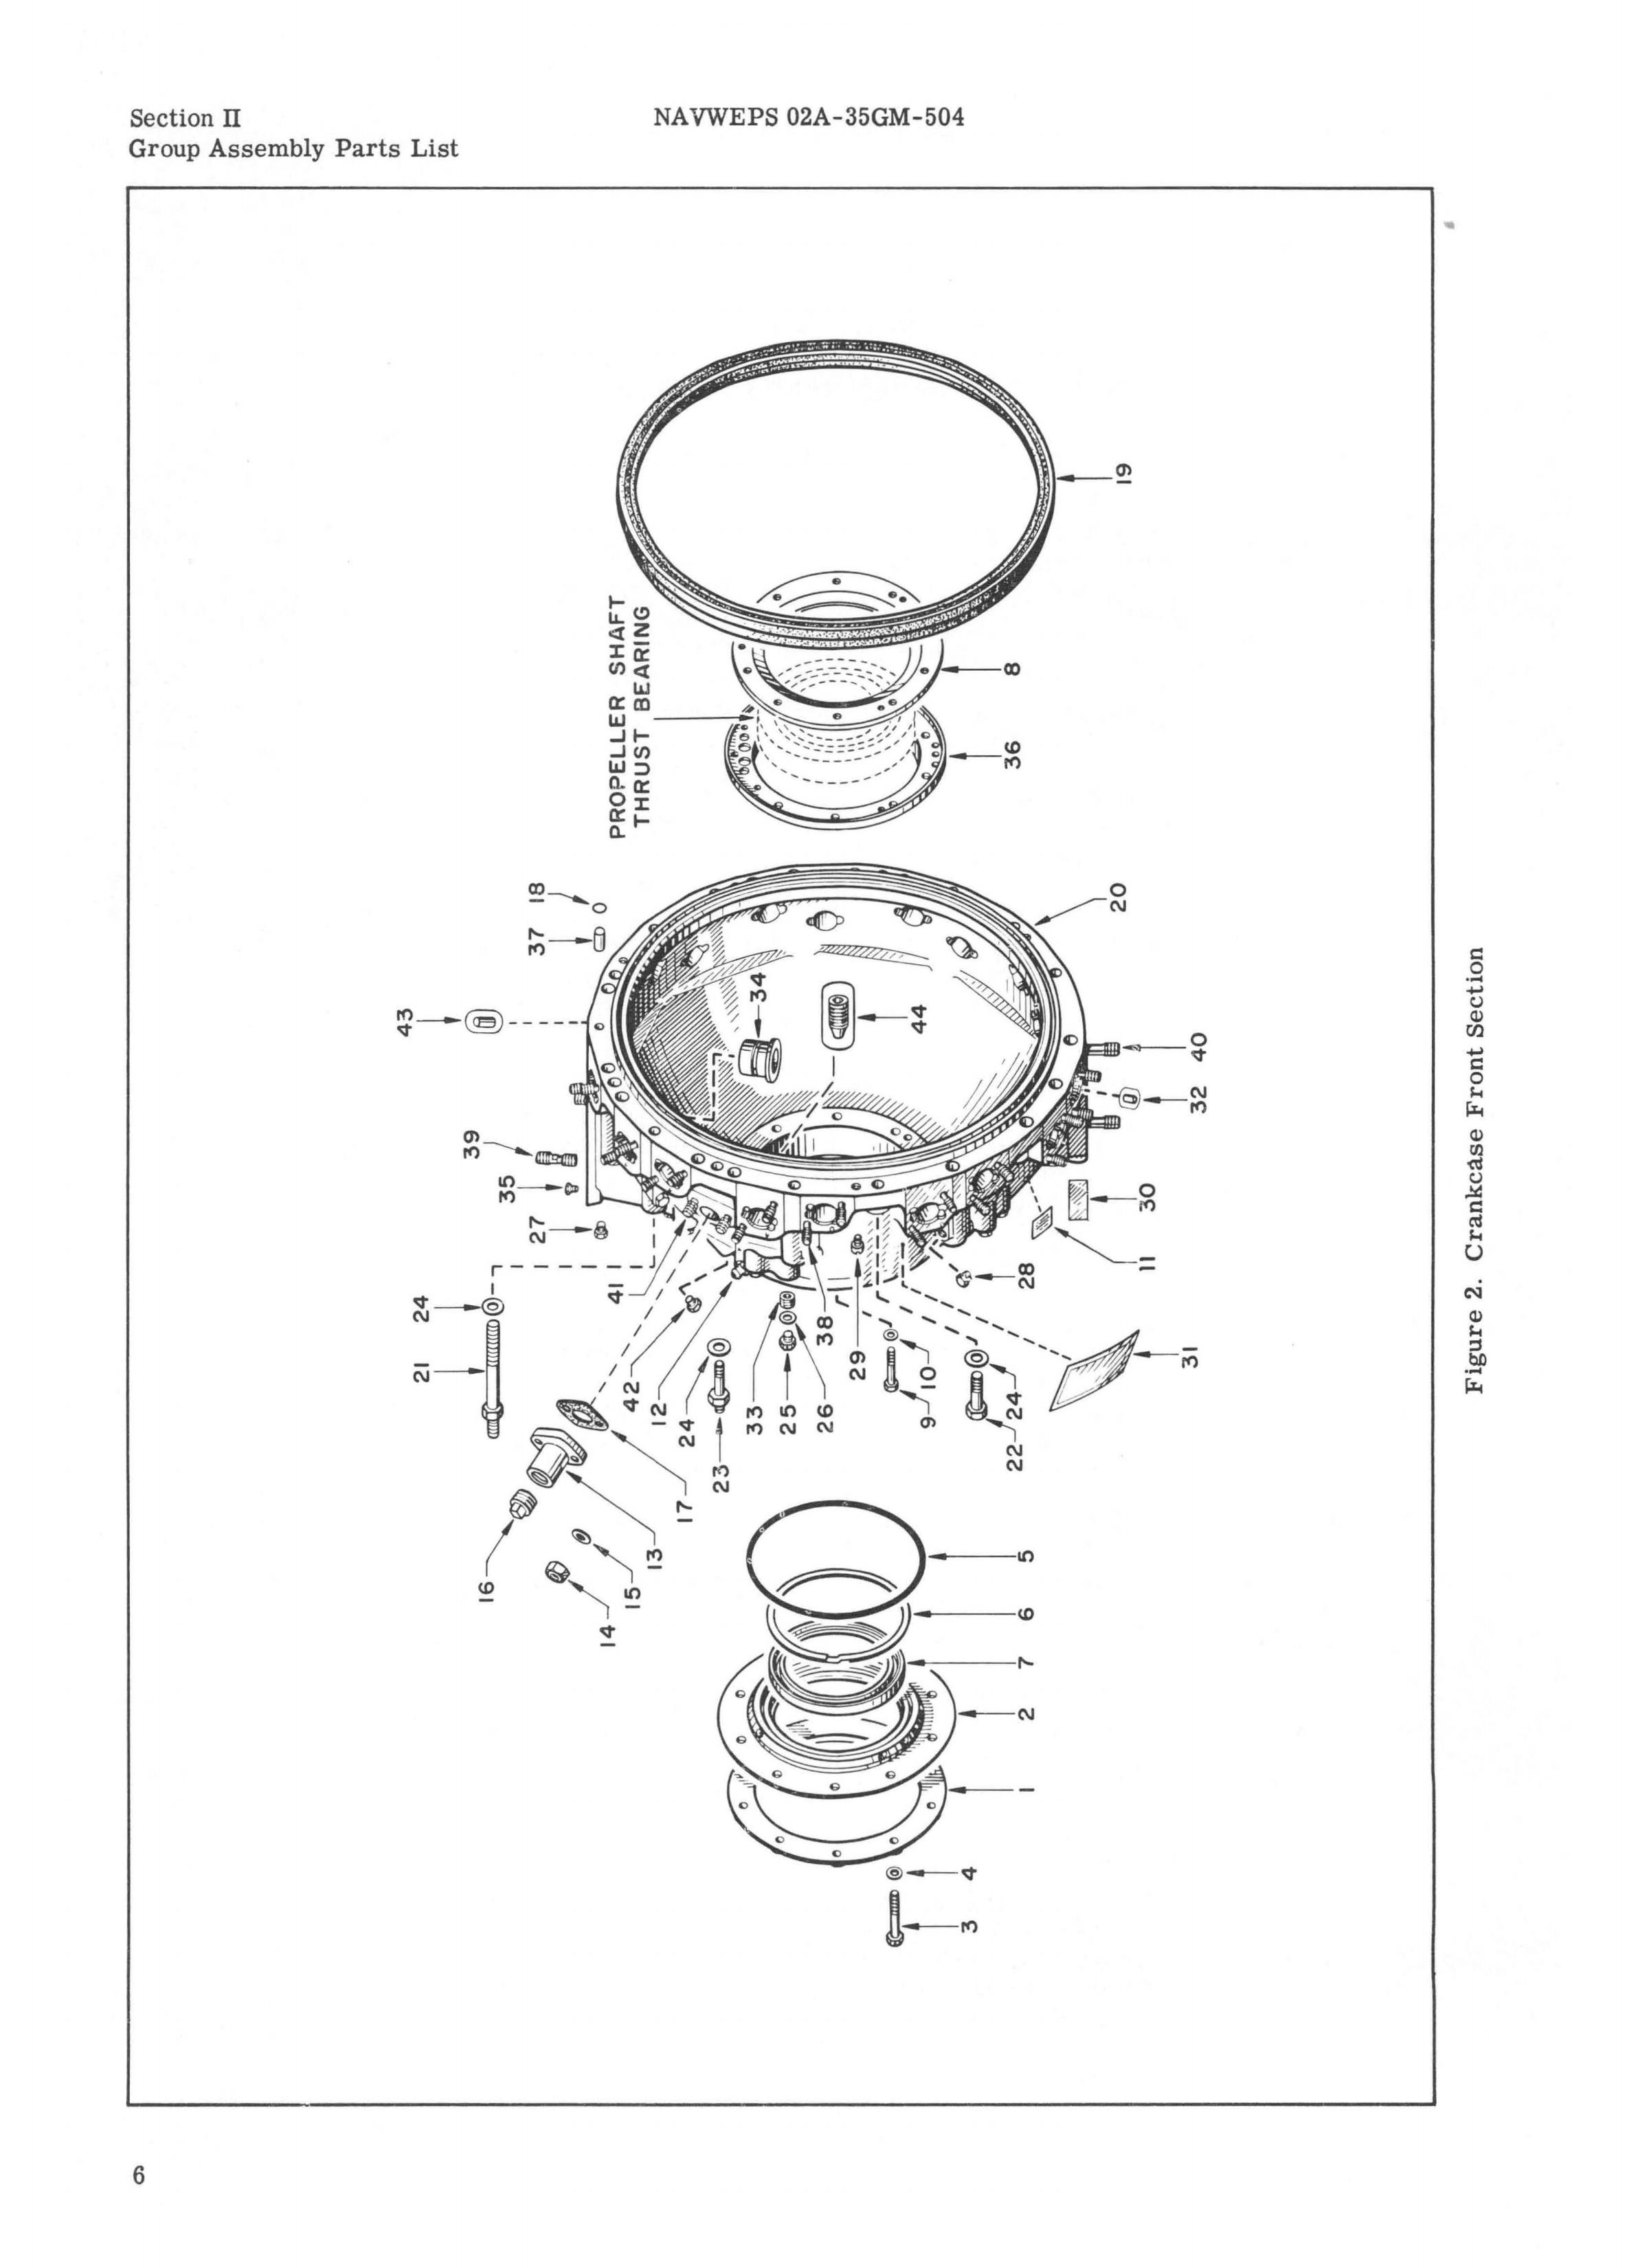 Sample page 12 from AirCorps Library document: Illustrated Parts Breakdown for R1820-84A, B, C, and D Engines